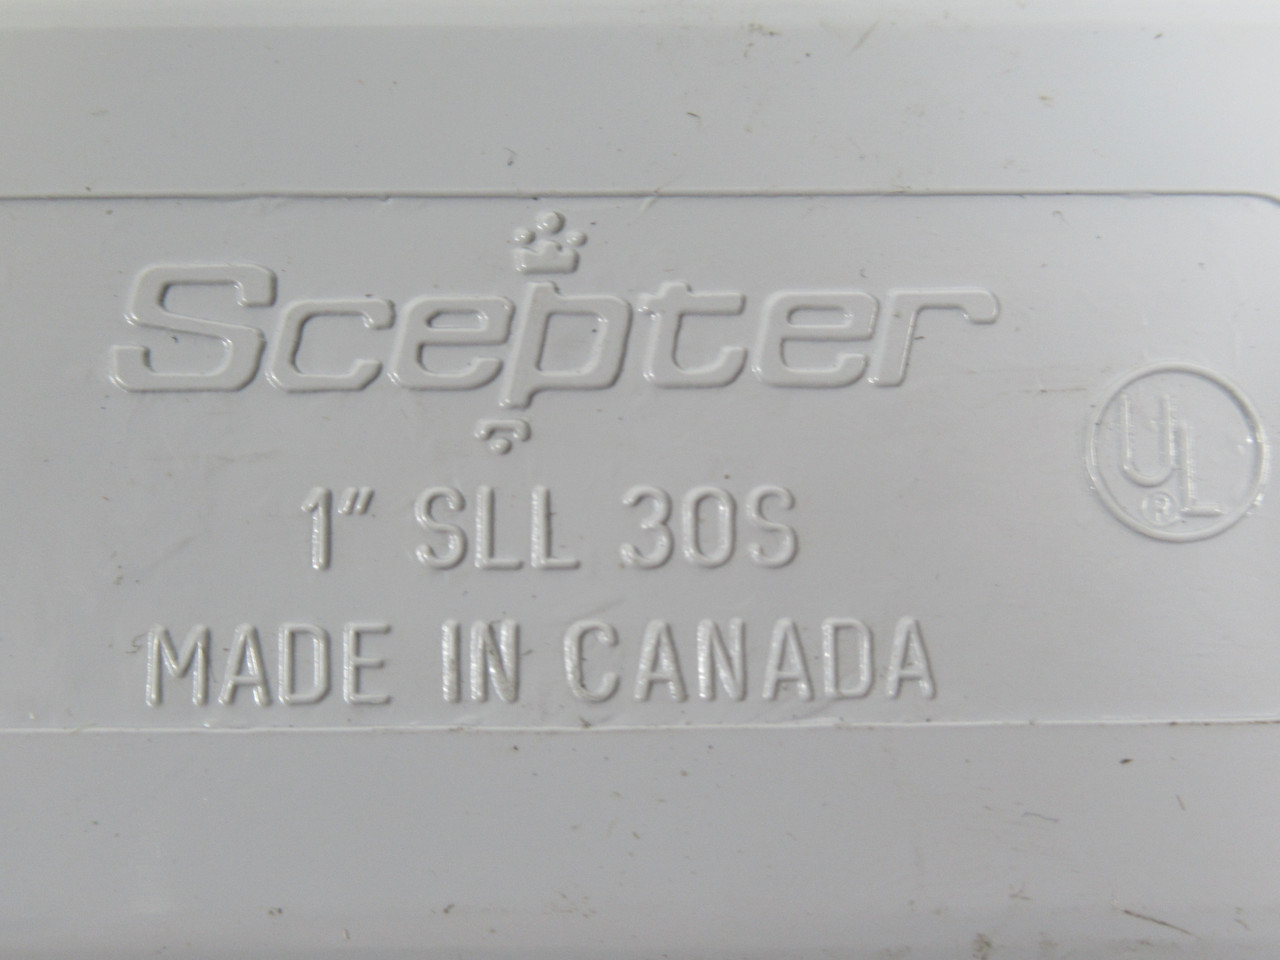 Scepter SLL30S Conduit Body 1" W/ Cover USED